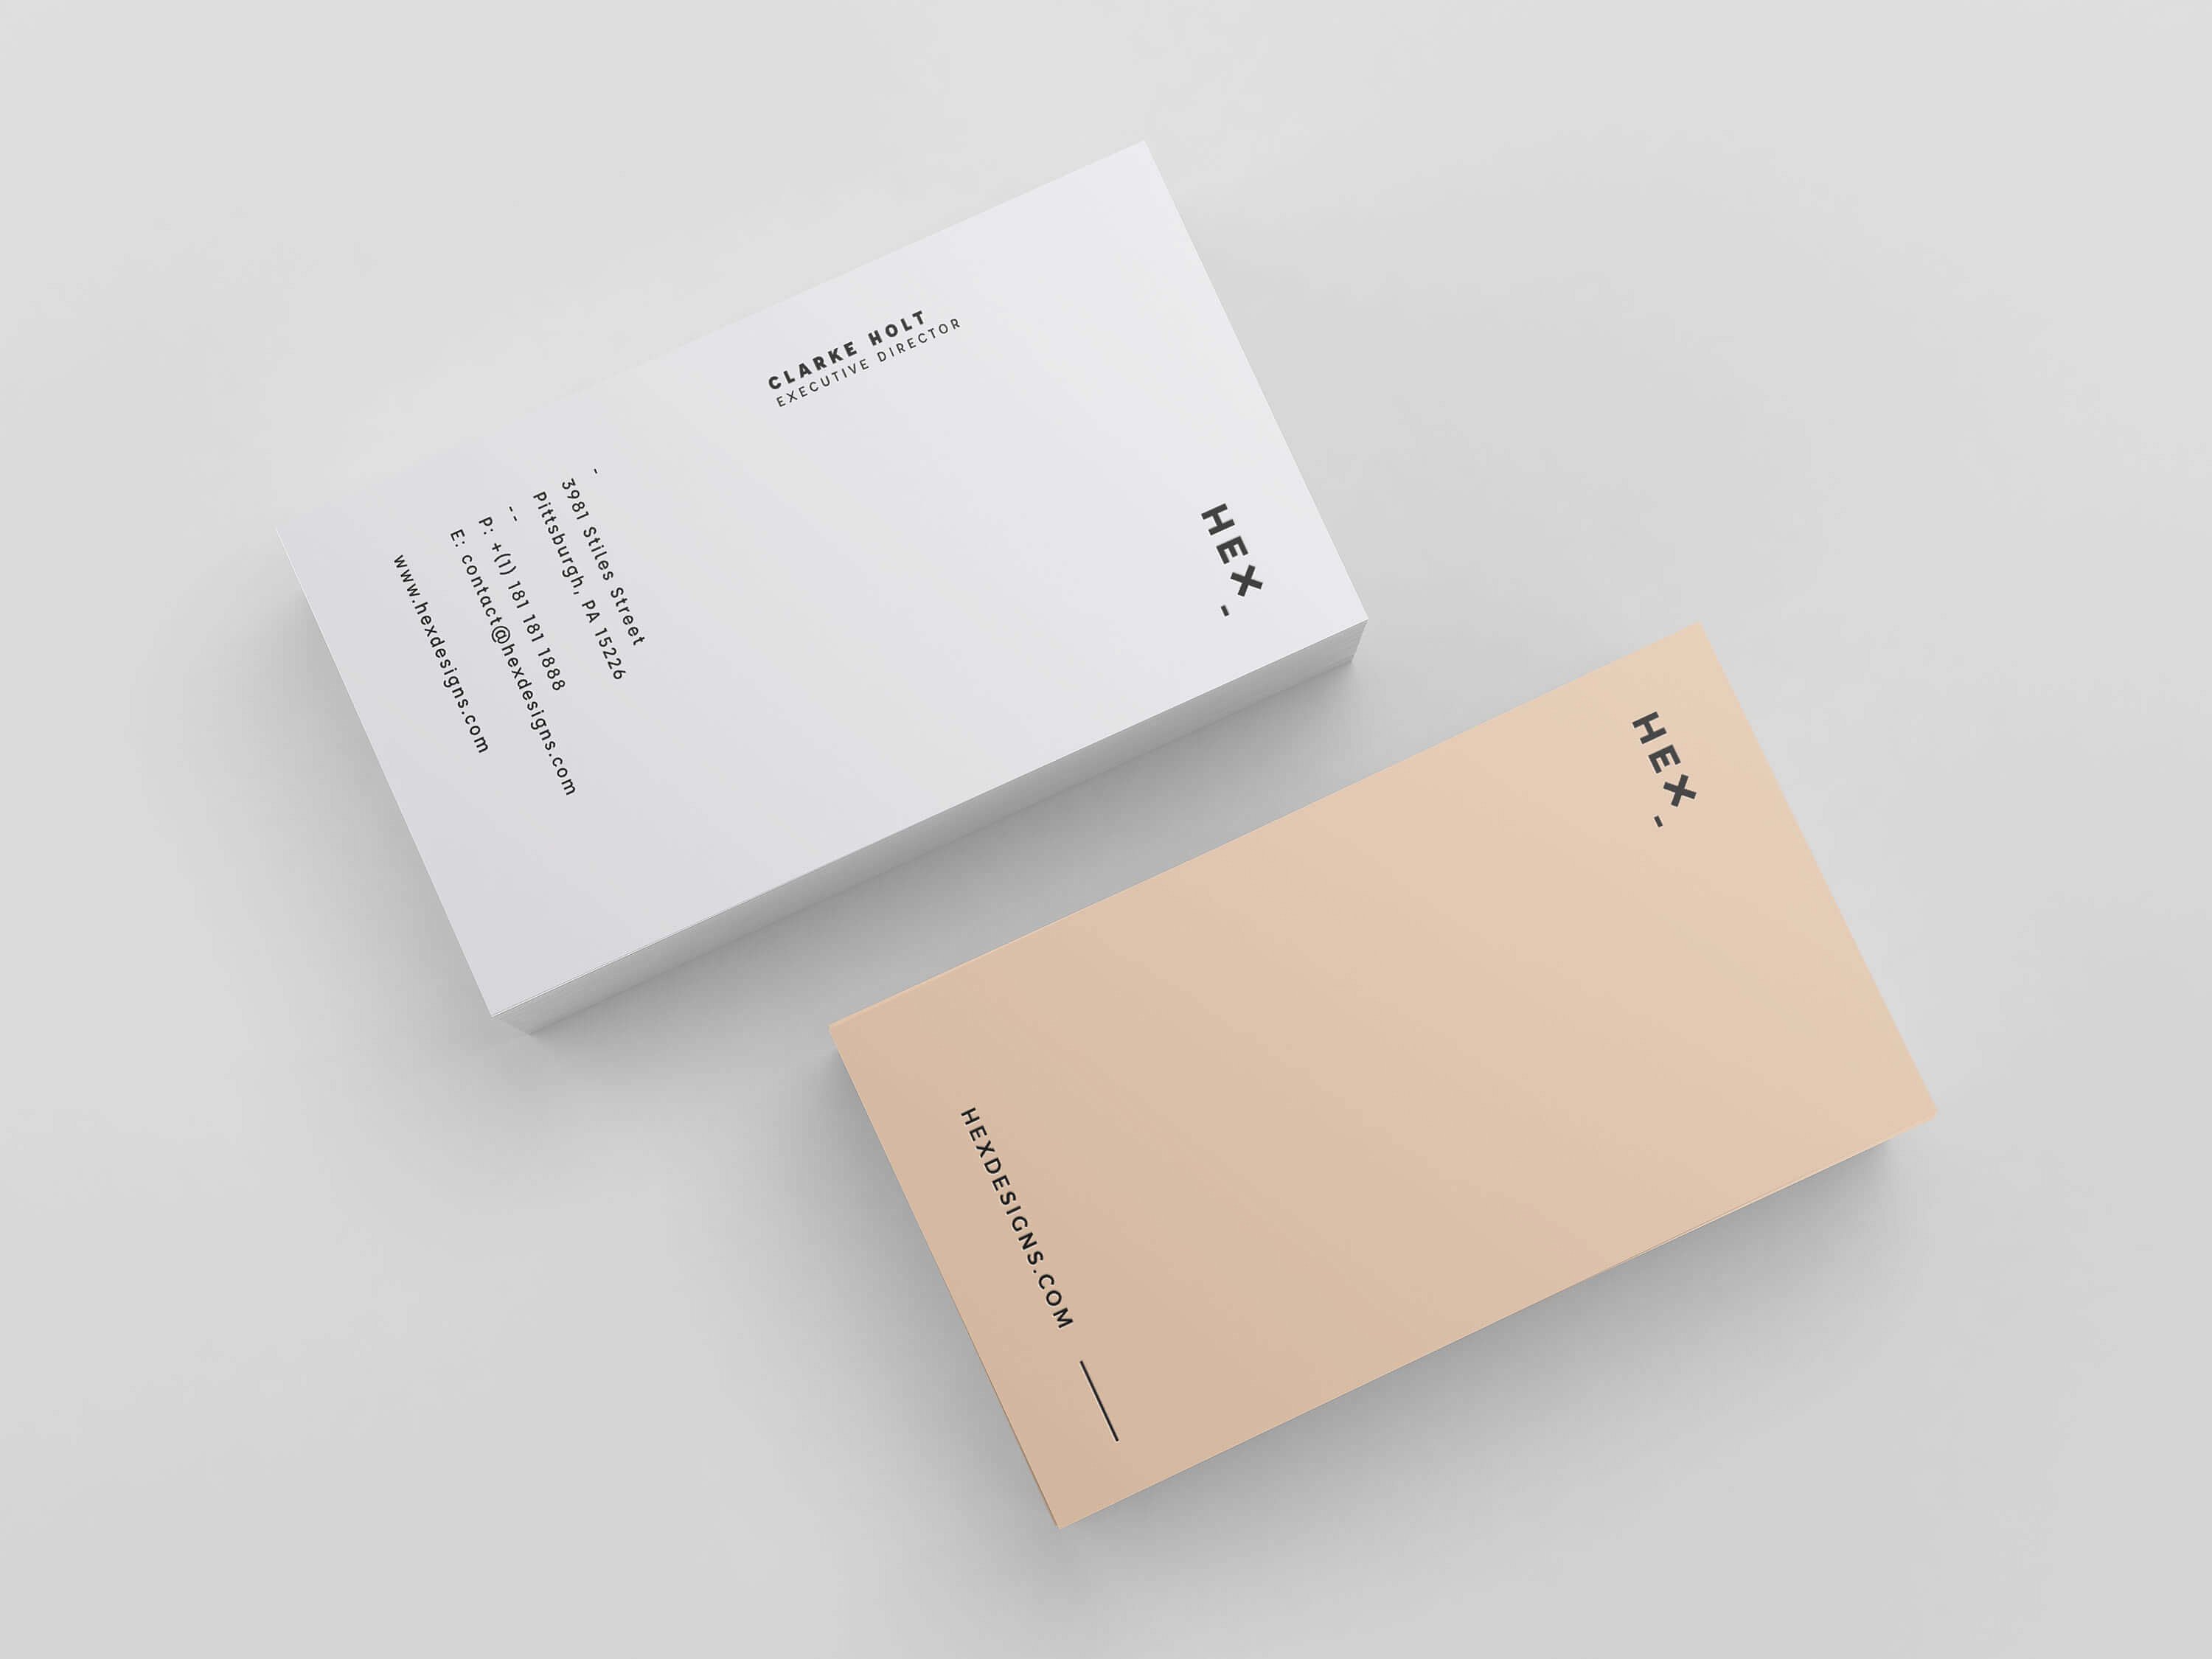 HEX Business Card Template